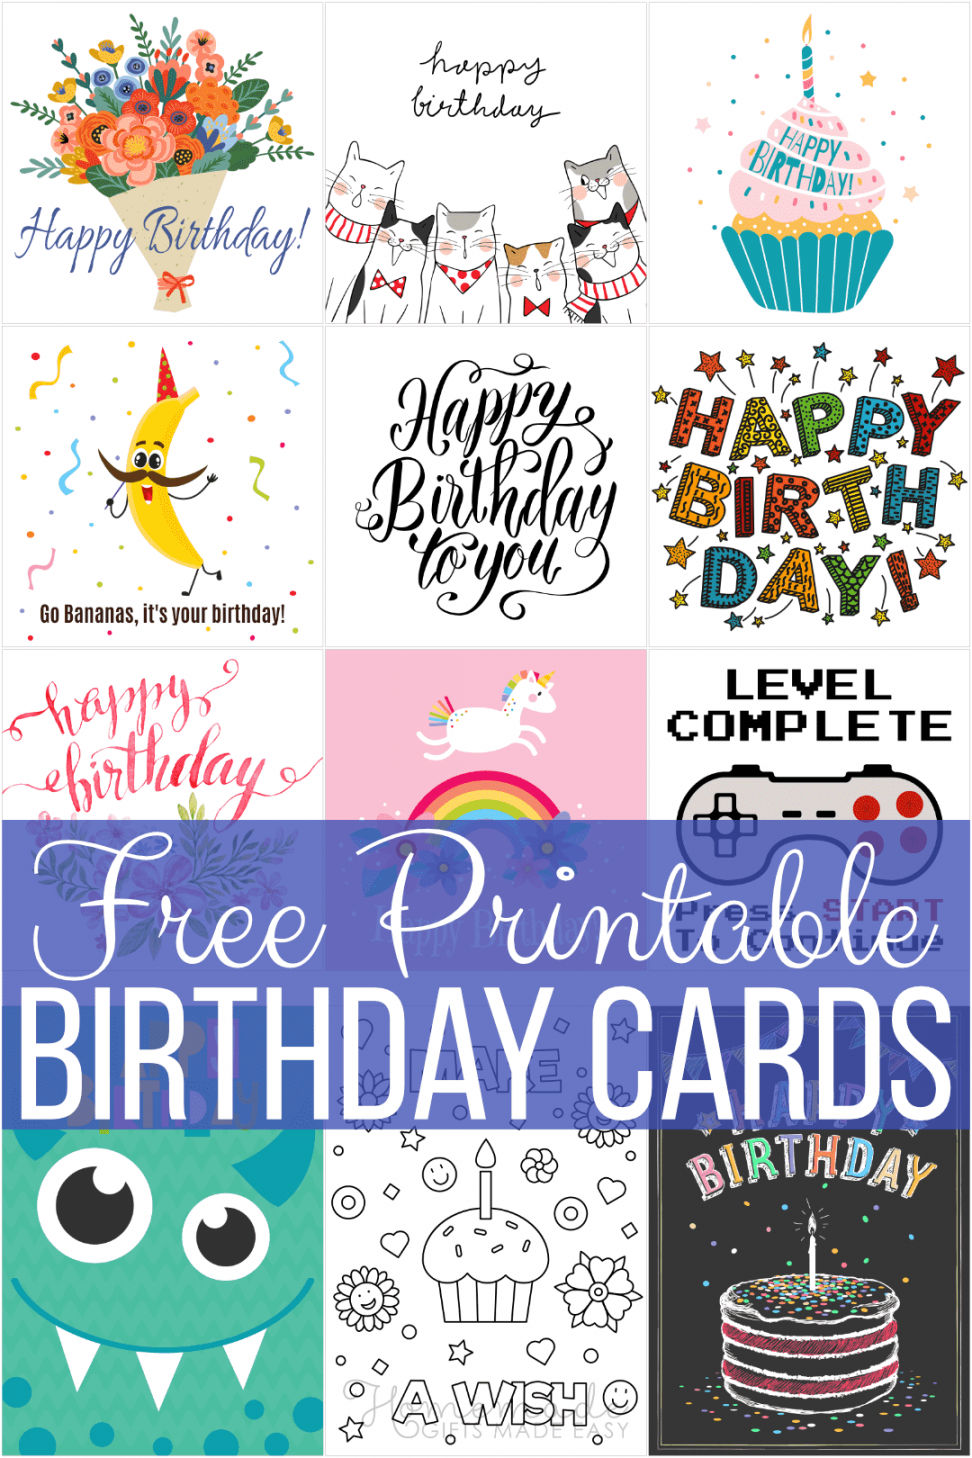 Free Printable Birthday Cards For Him - Printable - Free Printable Birthday Cards for Everyone